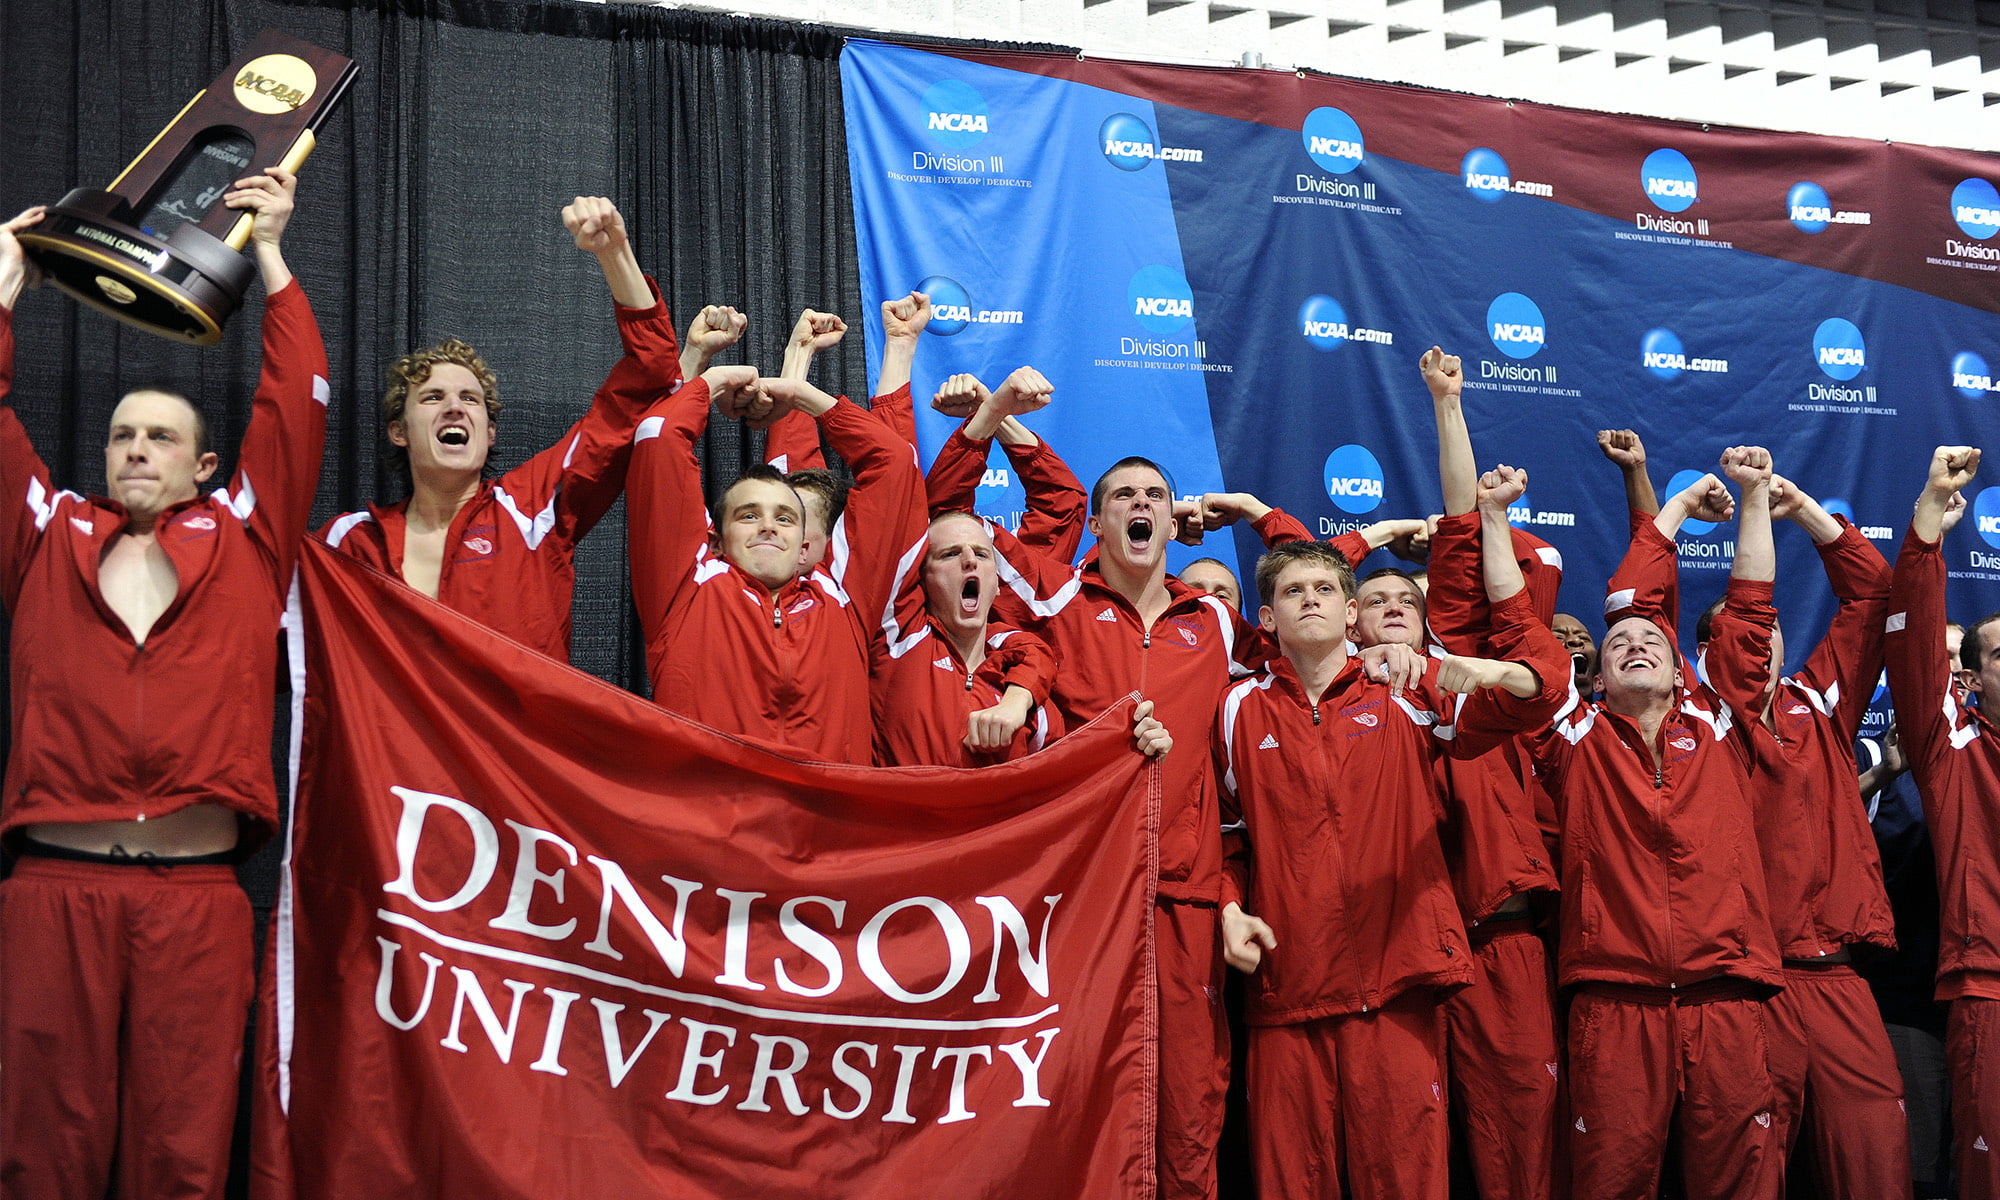 The ز,Ȳַ
######### mens swim team celebrates its first NCAA championship in Knoxville, Tennessee